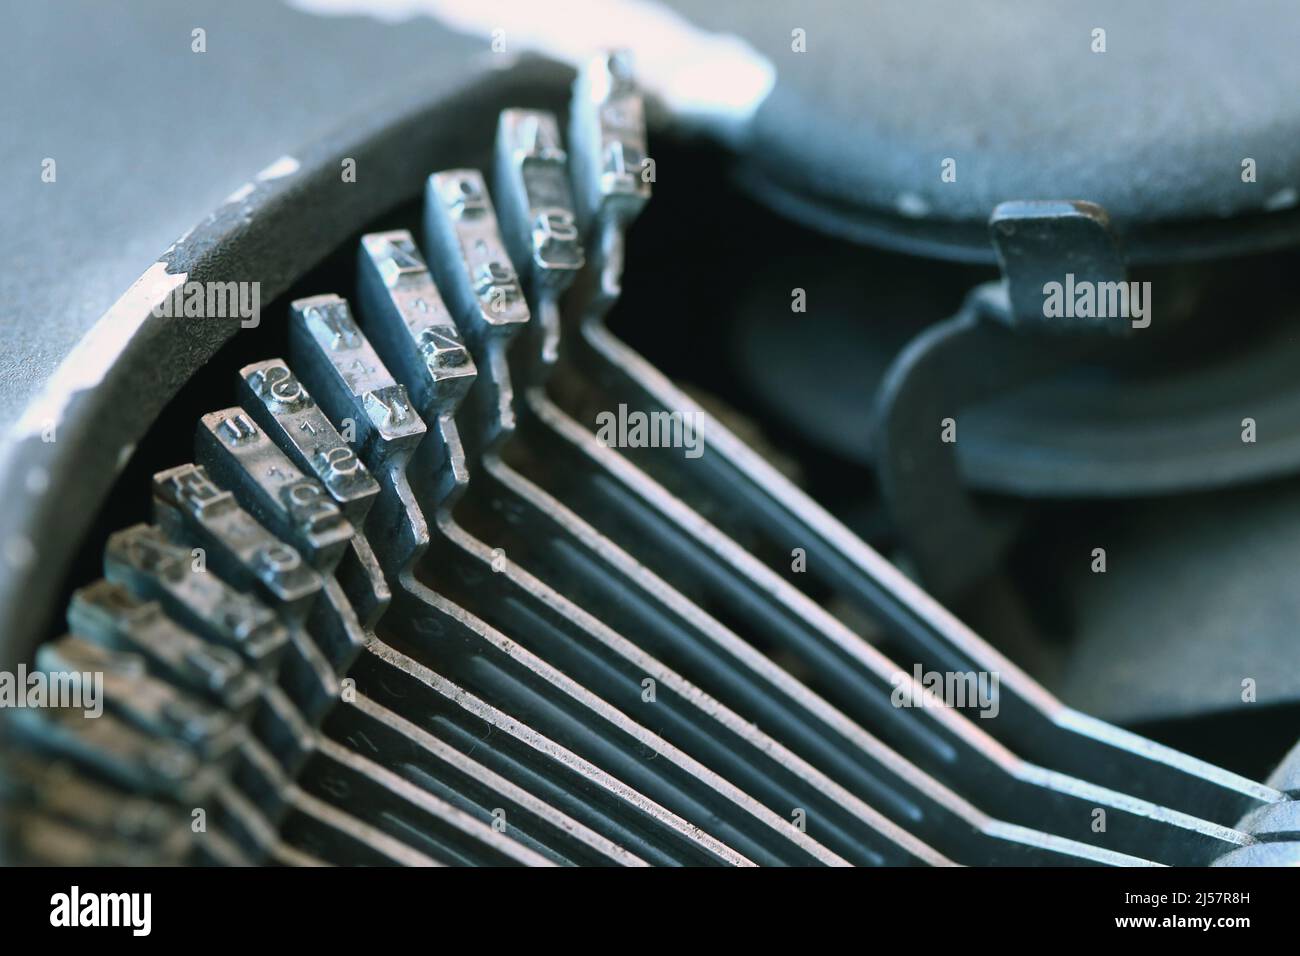 Close-up horizontal shot of metal printing letters using on a typewriters. Stock Photo